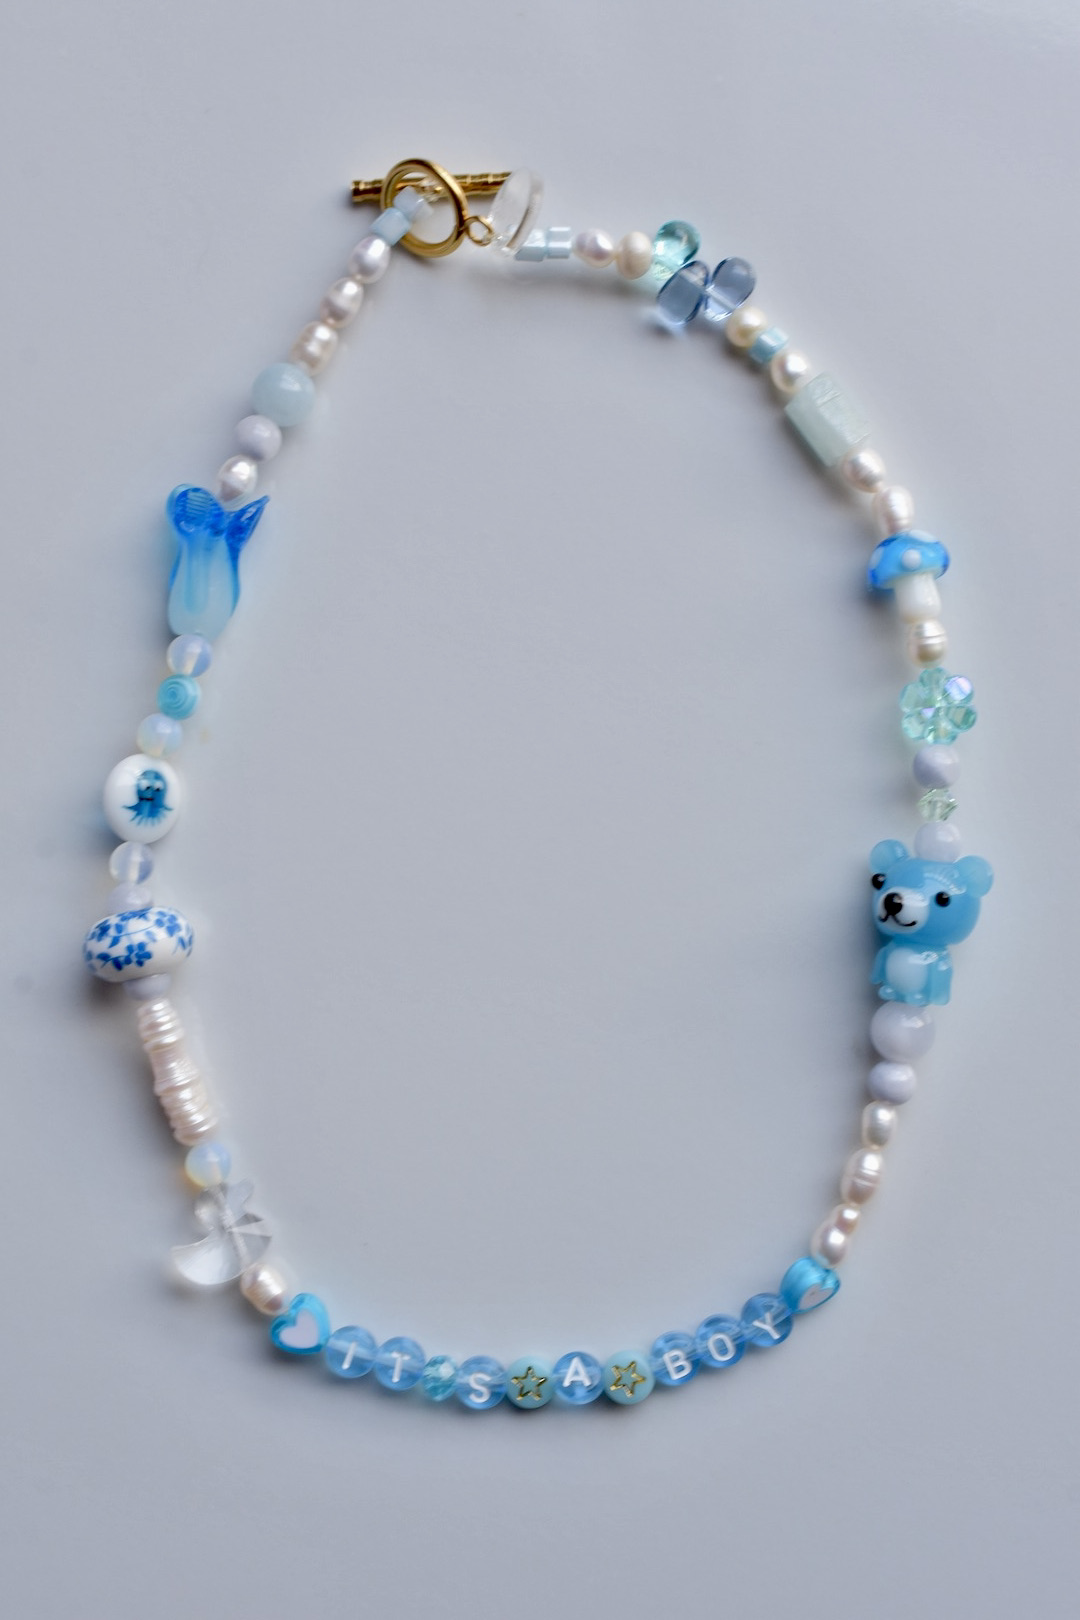 It's a boy blue pastel necklace with lucky murano glass beads